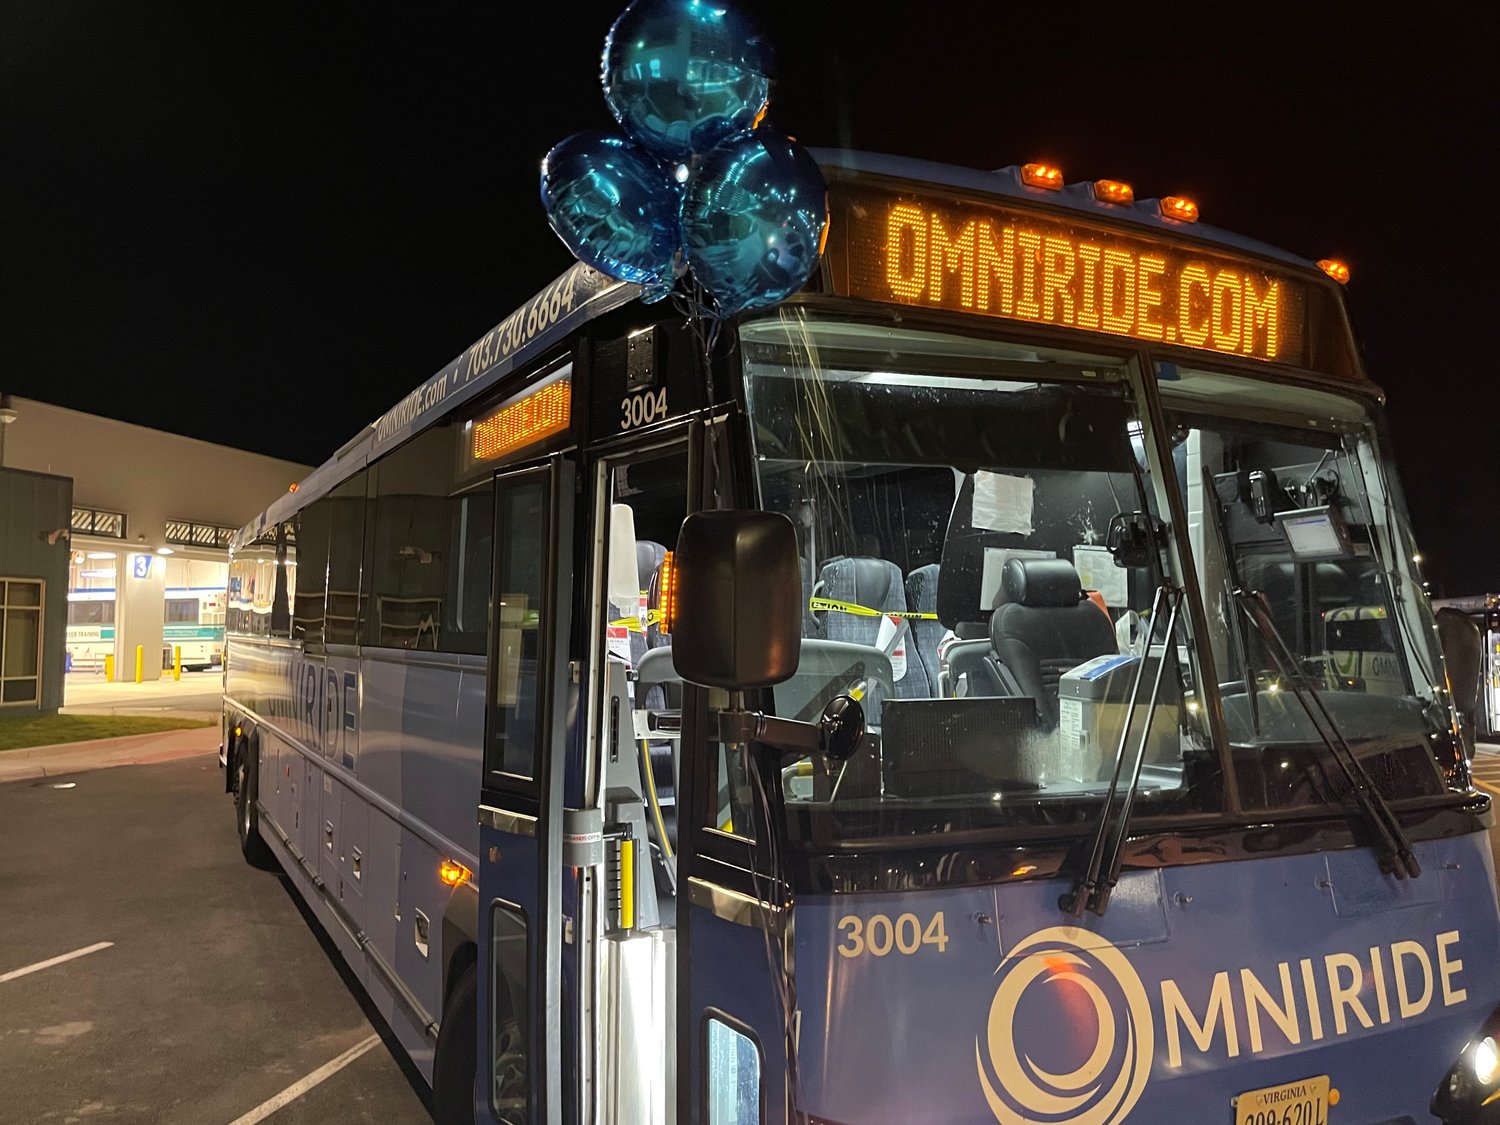 PRTC staff celebrate the inaugural launch of buses from their new western location in Manassas.